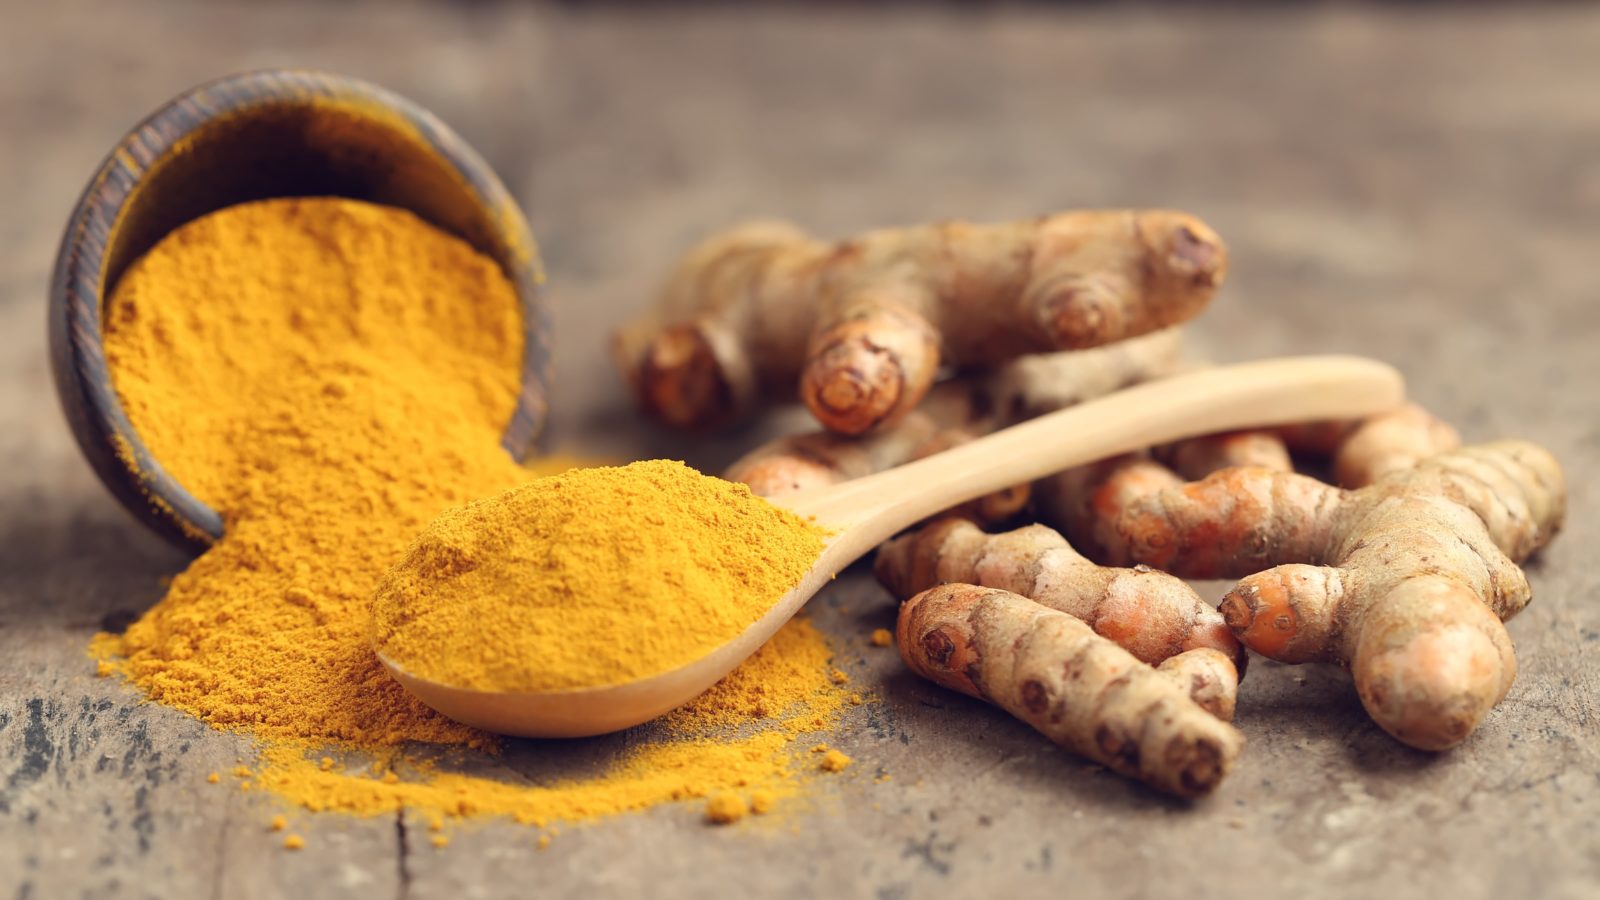 turmeric roots and powder